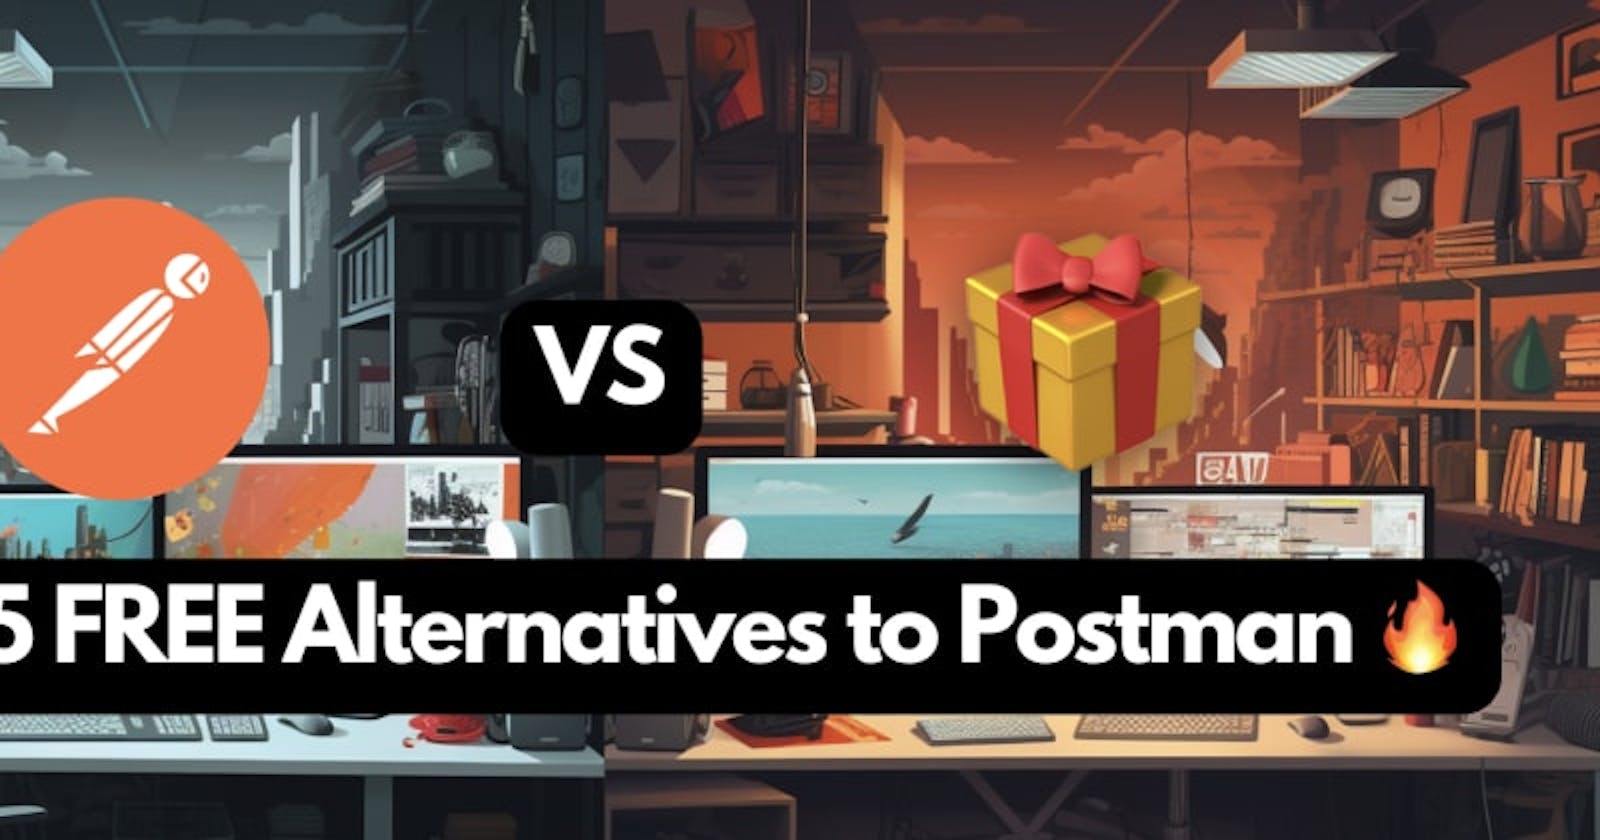 🕵️ Looking at the top 5 FREE Alternatives to Postman 🔥